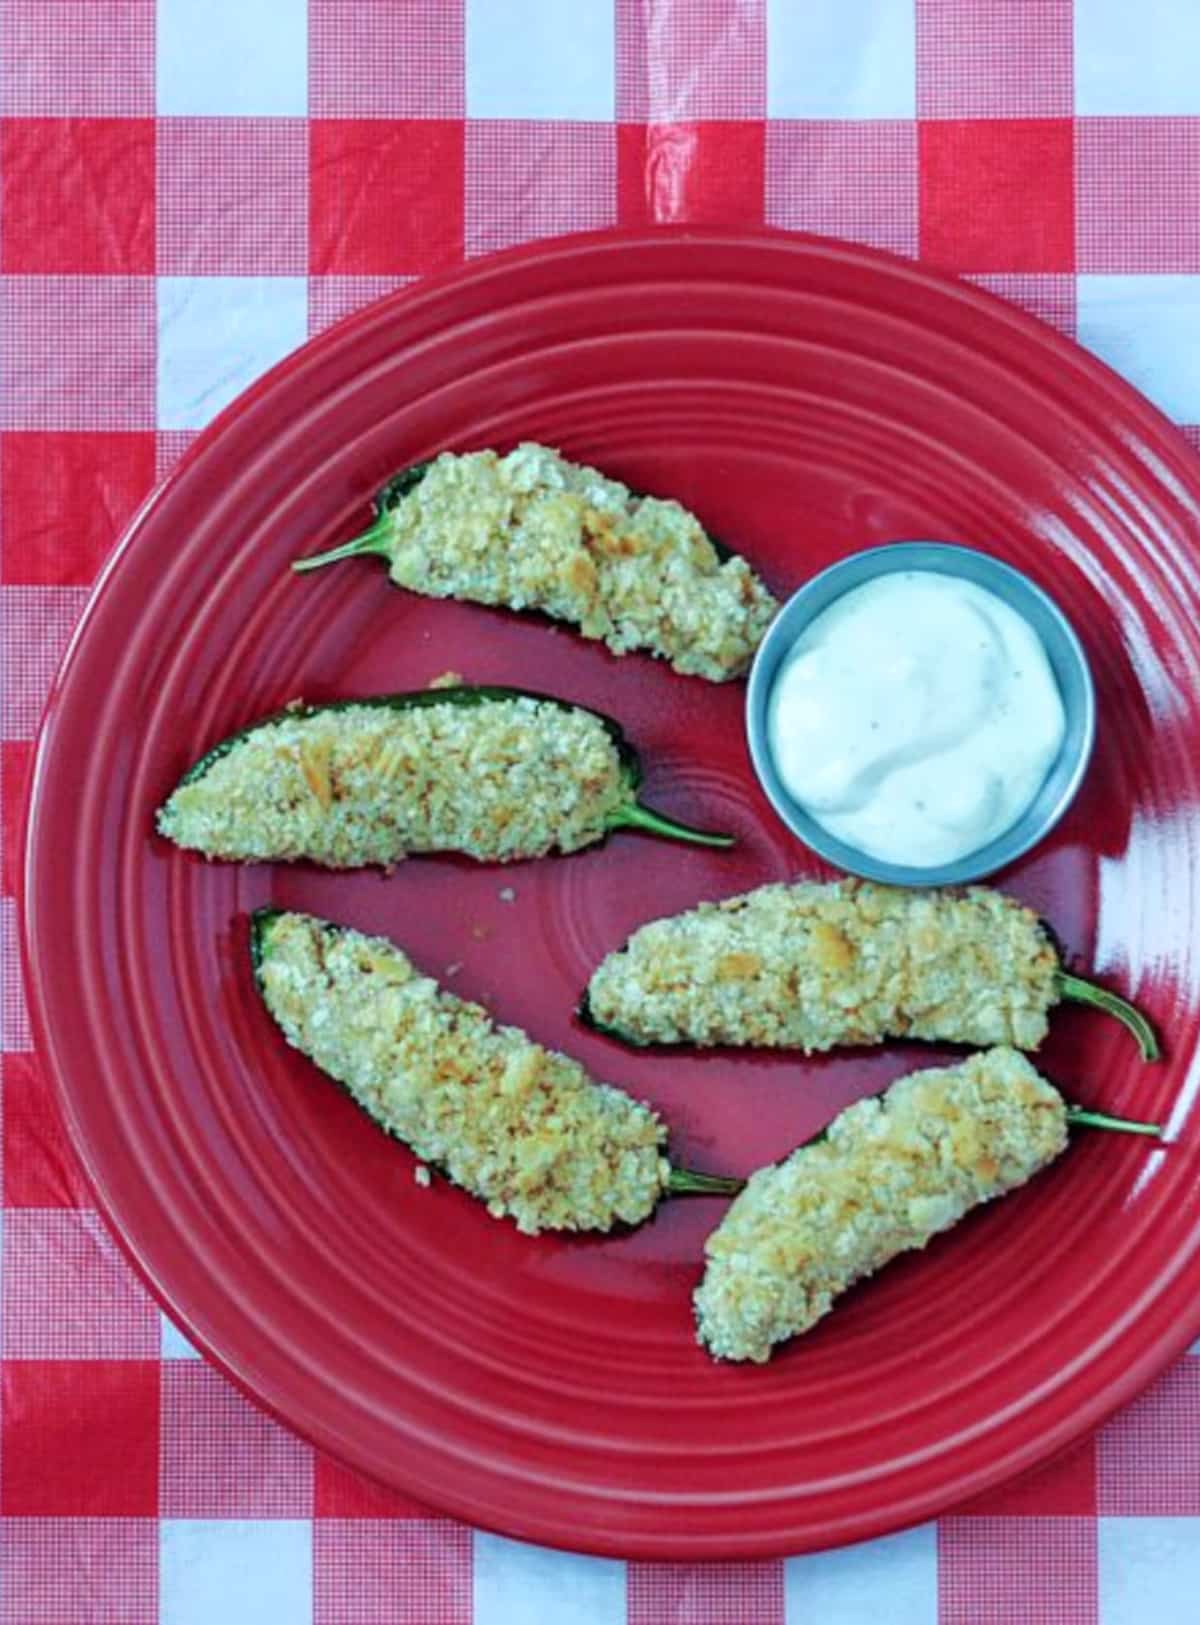 Overhead view of pineapple jalapeño poppers on a red plate with a small silver bowl of ranch dipping sauce.